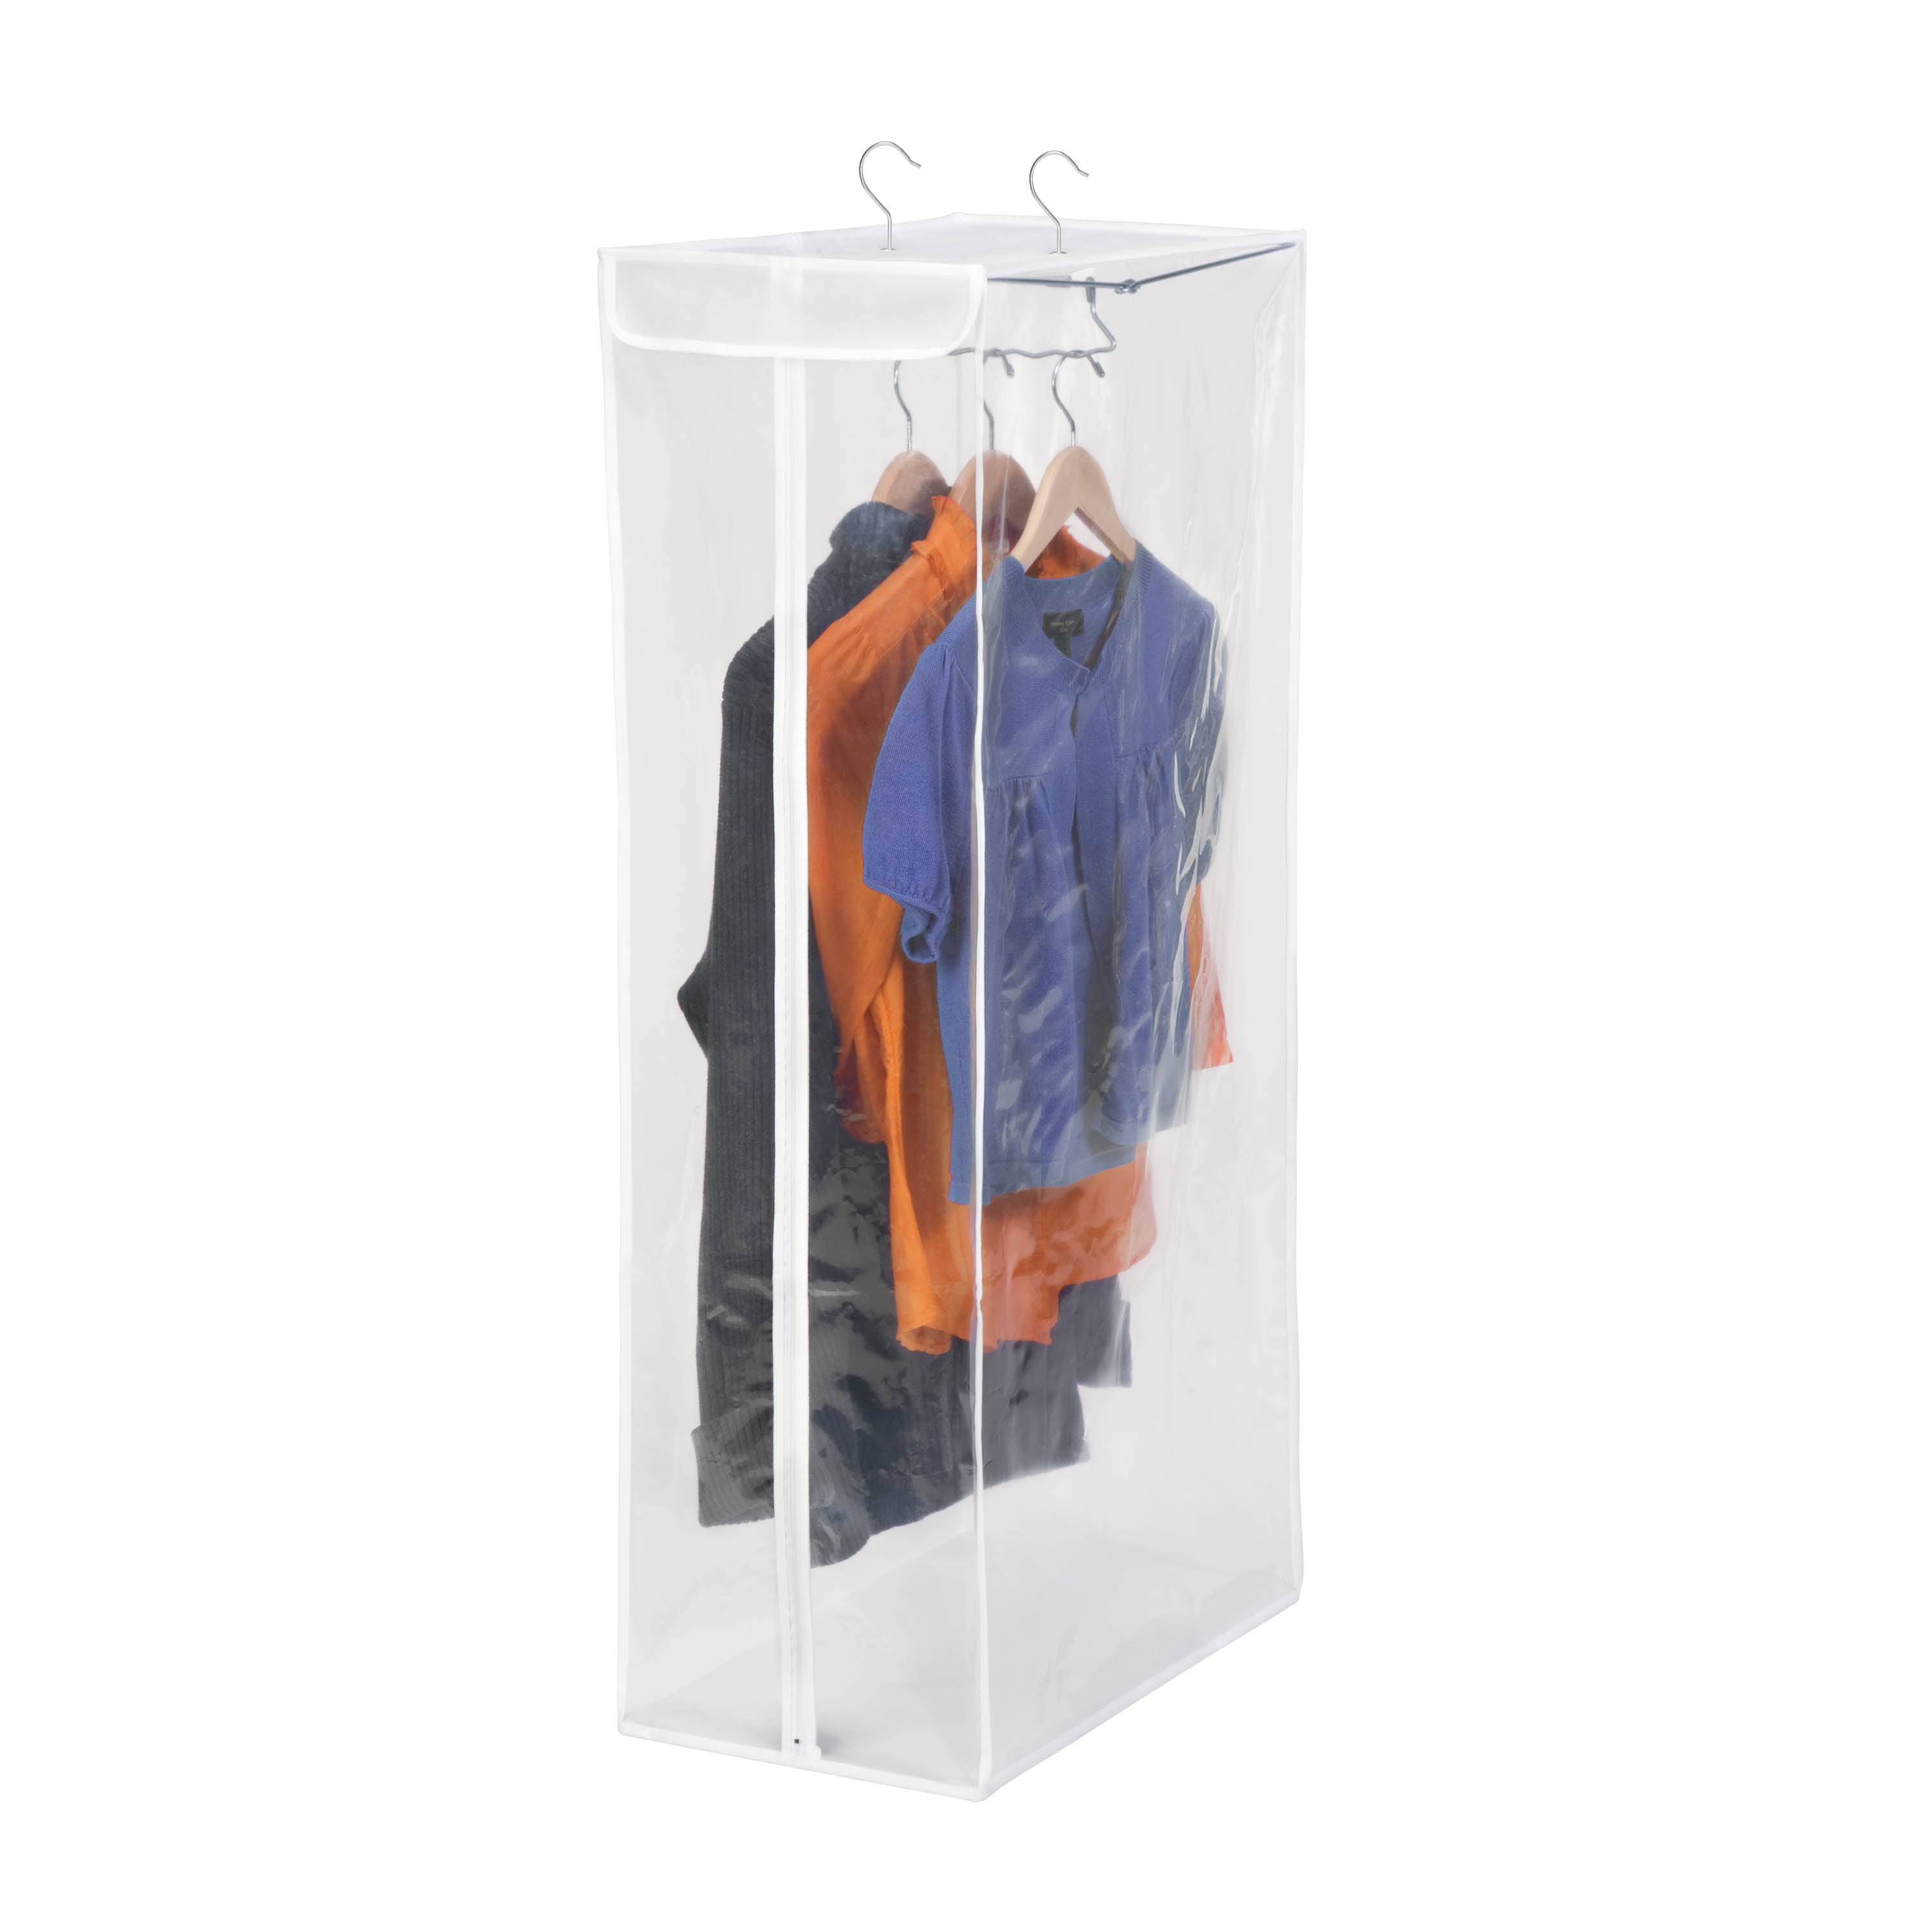 Honey-Can-Do Clothes Storage Bags: QVC Reviews